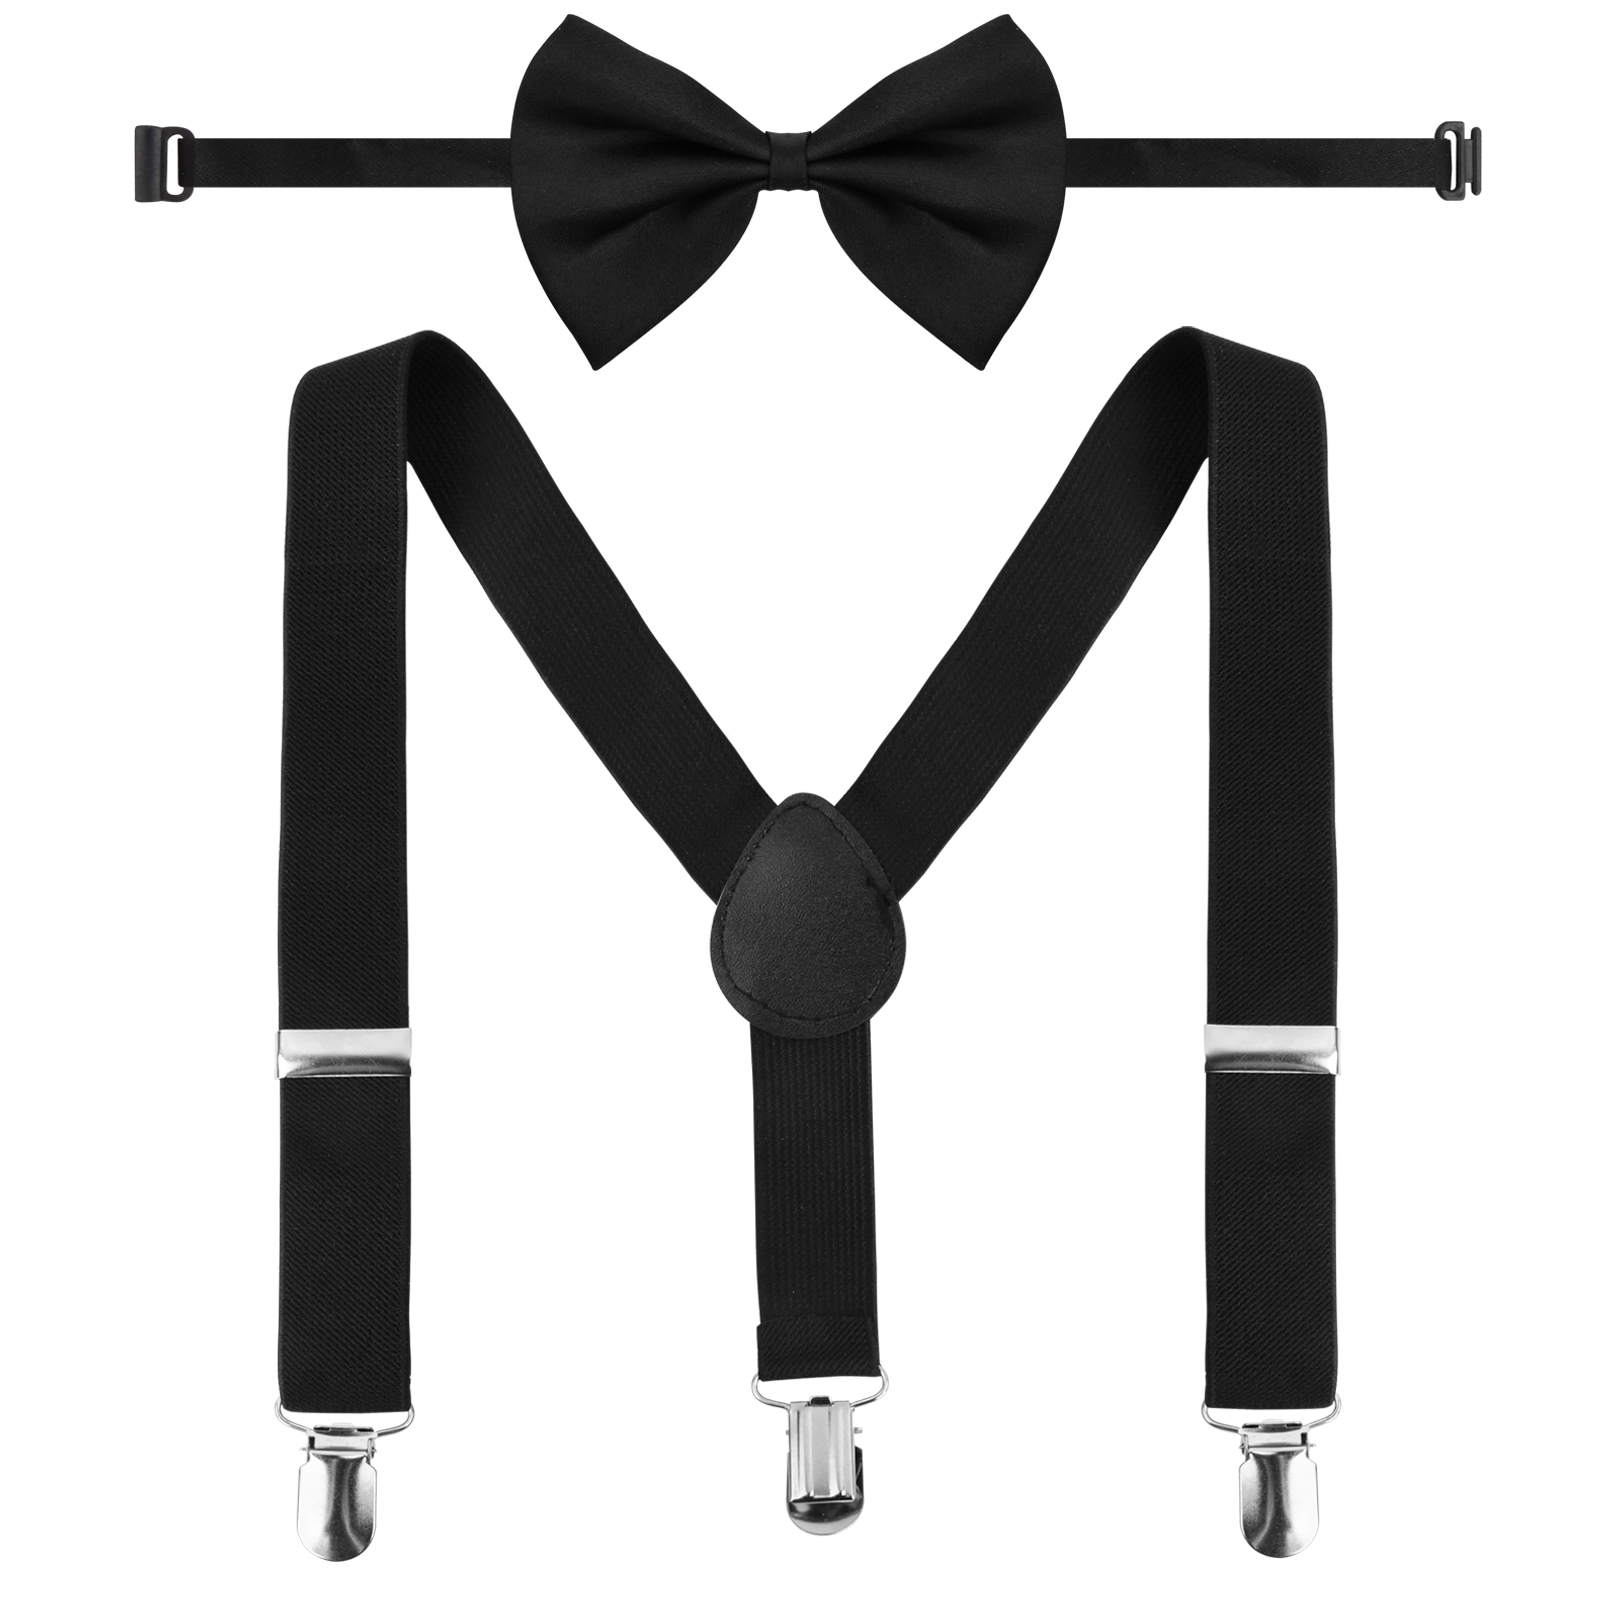 10Pcs Bow Tie Adjustable Straps with Clips - Black Adjustable Elastic Band  Men's Bow Tie Belt Elastic Straps with Clips- Black Bow Tie Strap with Clip